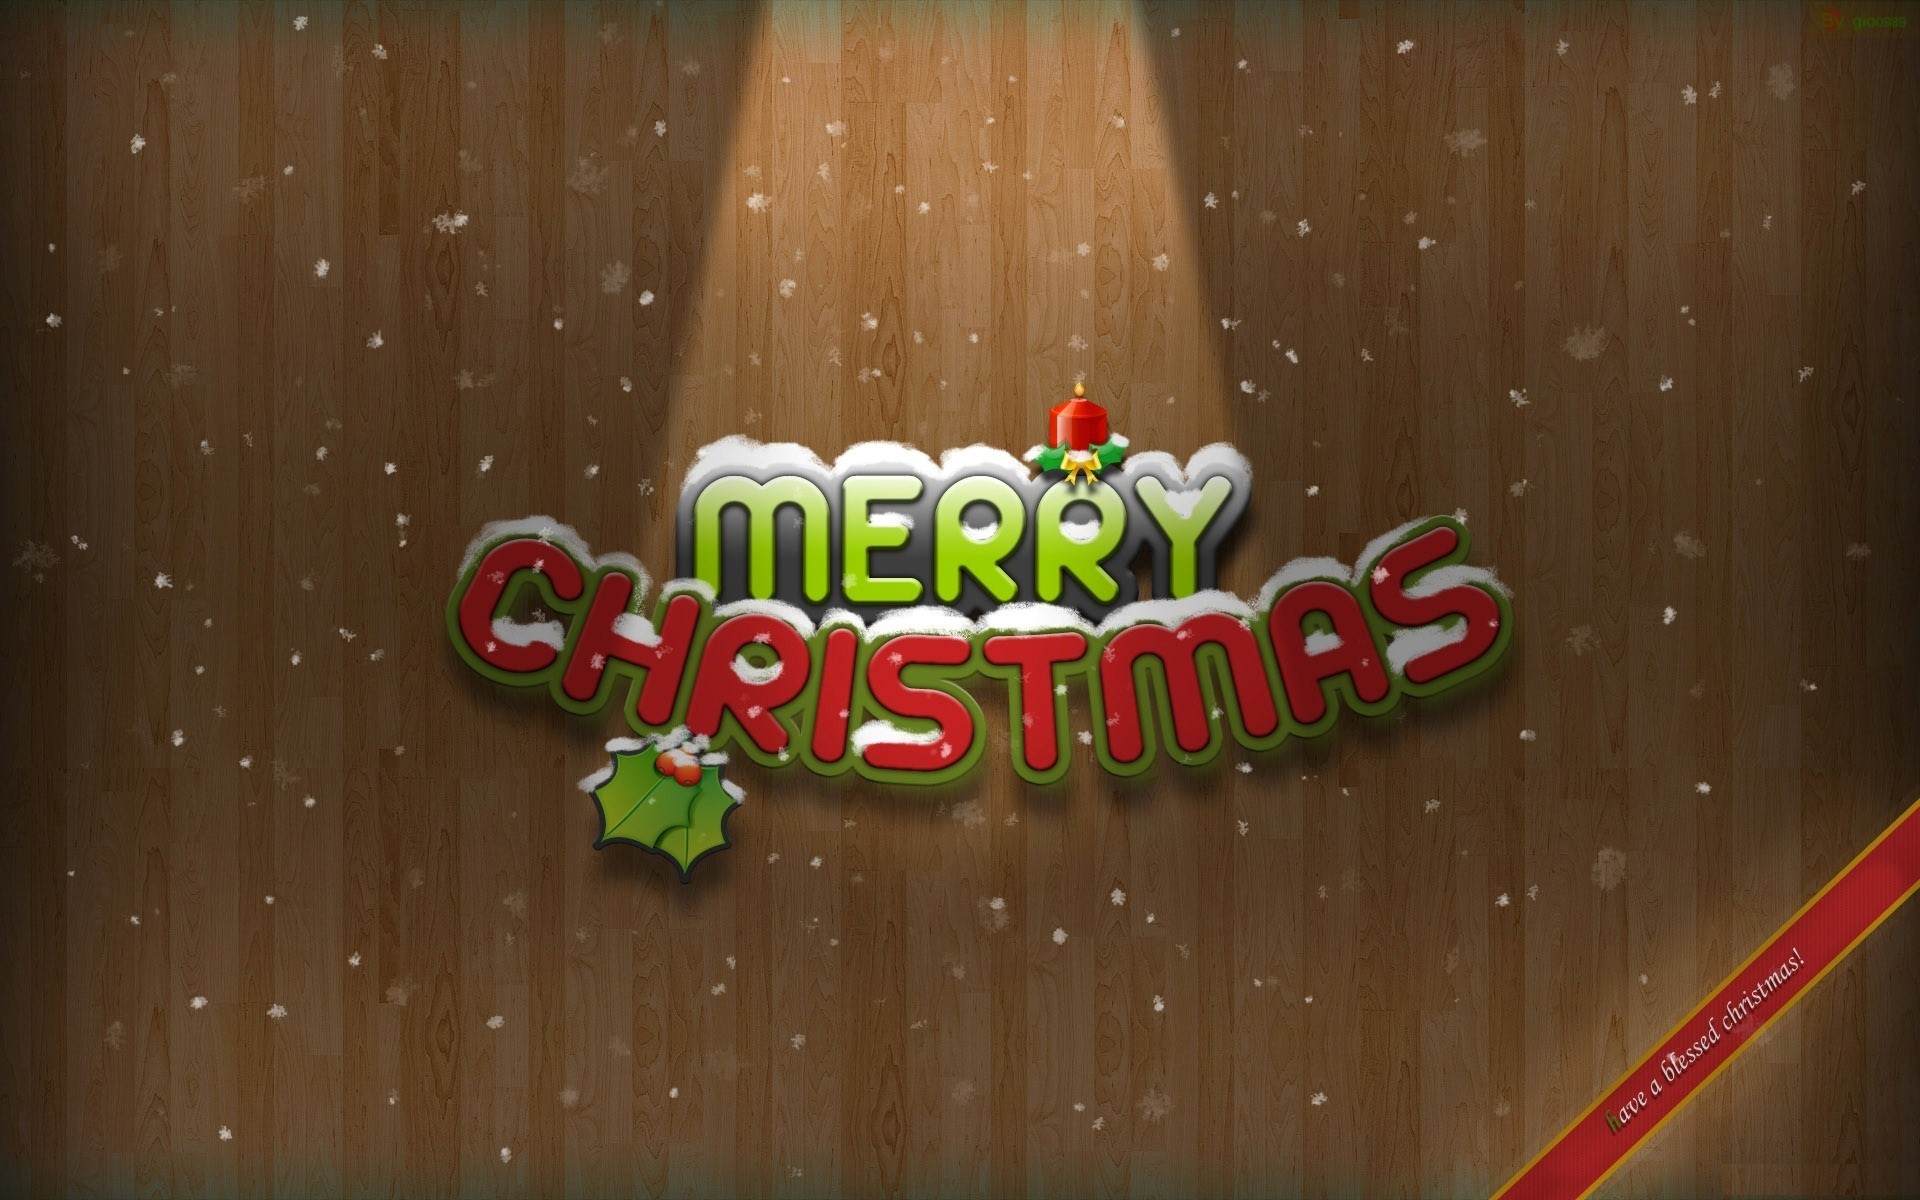 1920x1200 ... blessed yule wallpaper - photo #31 ...